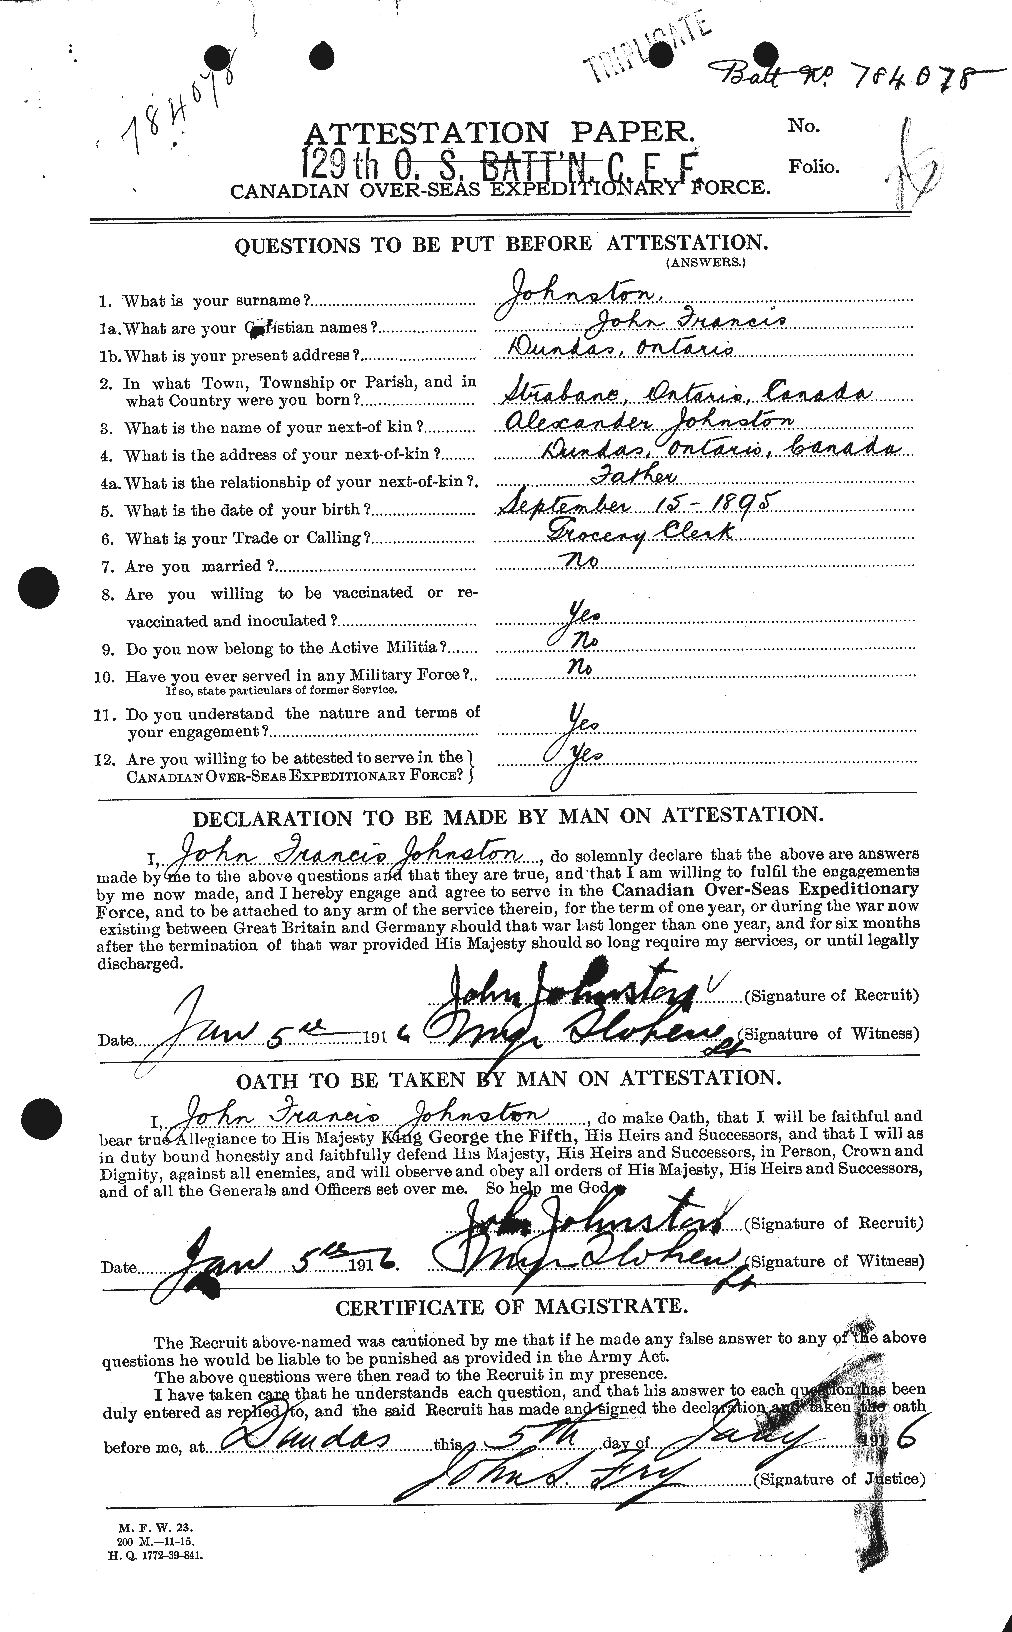 Personnel Records of the First World War - CEF 422829a